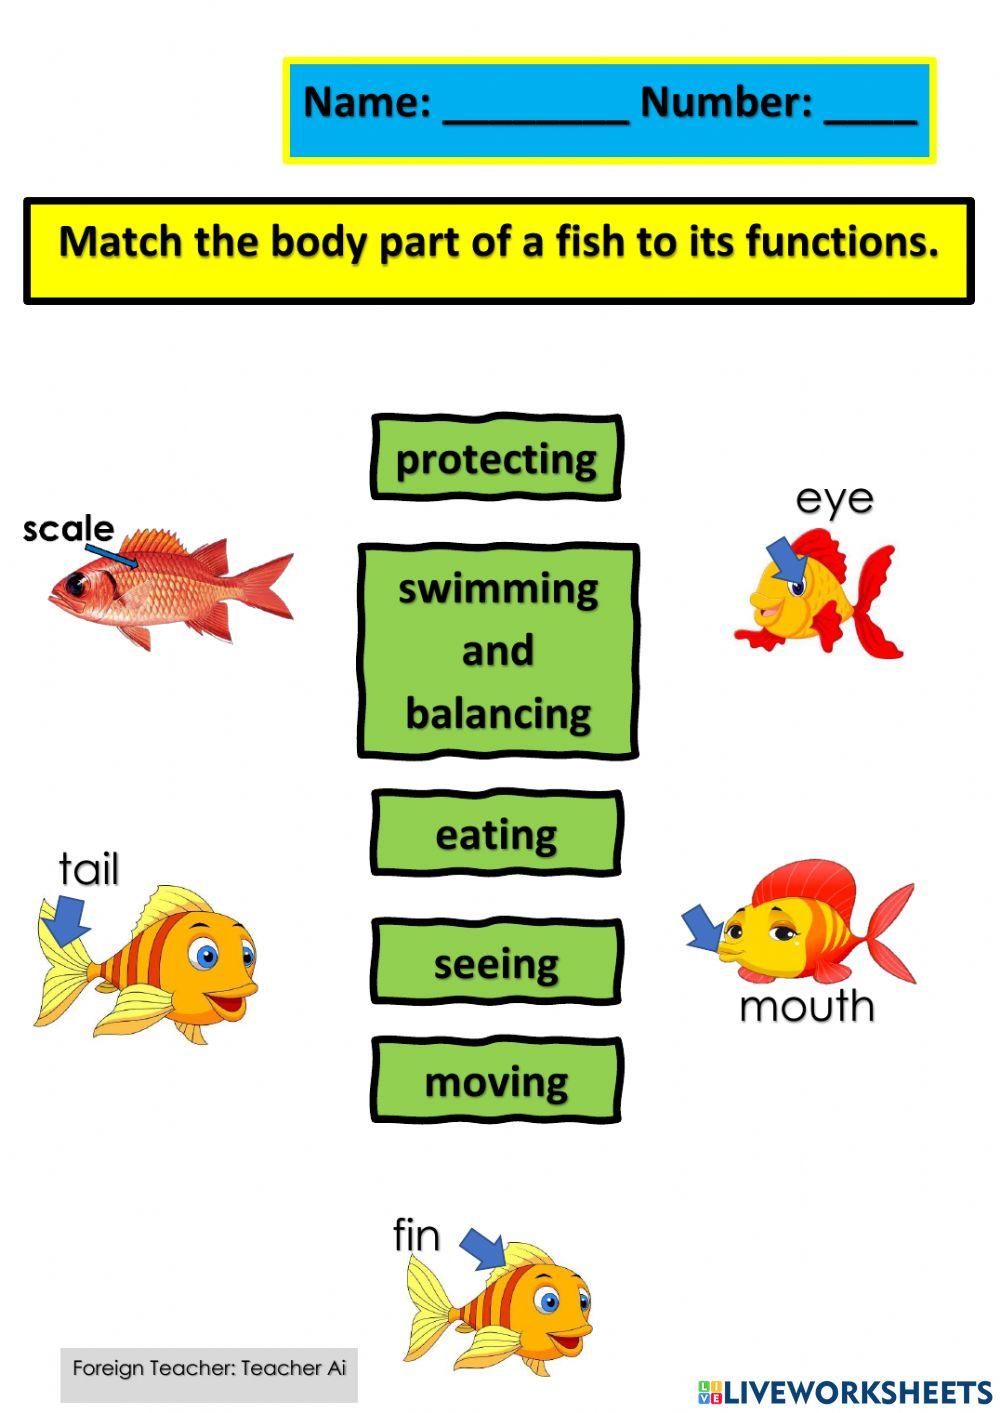 Parts of fish and functions